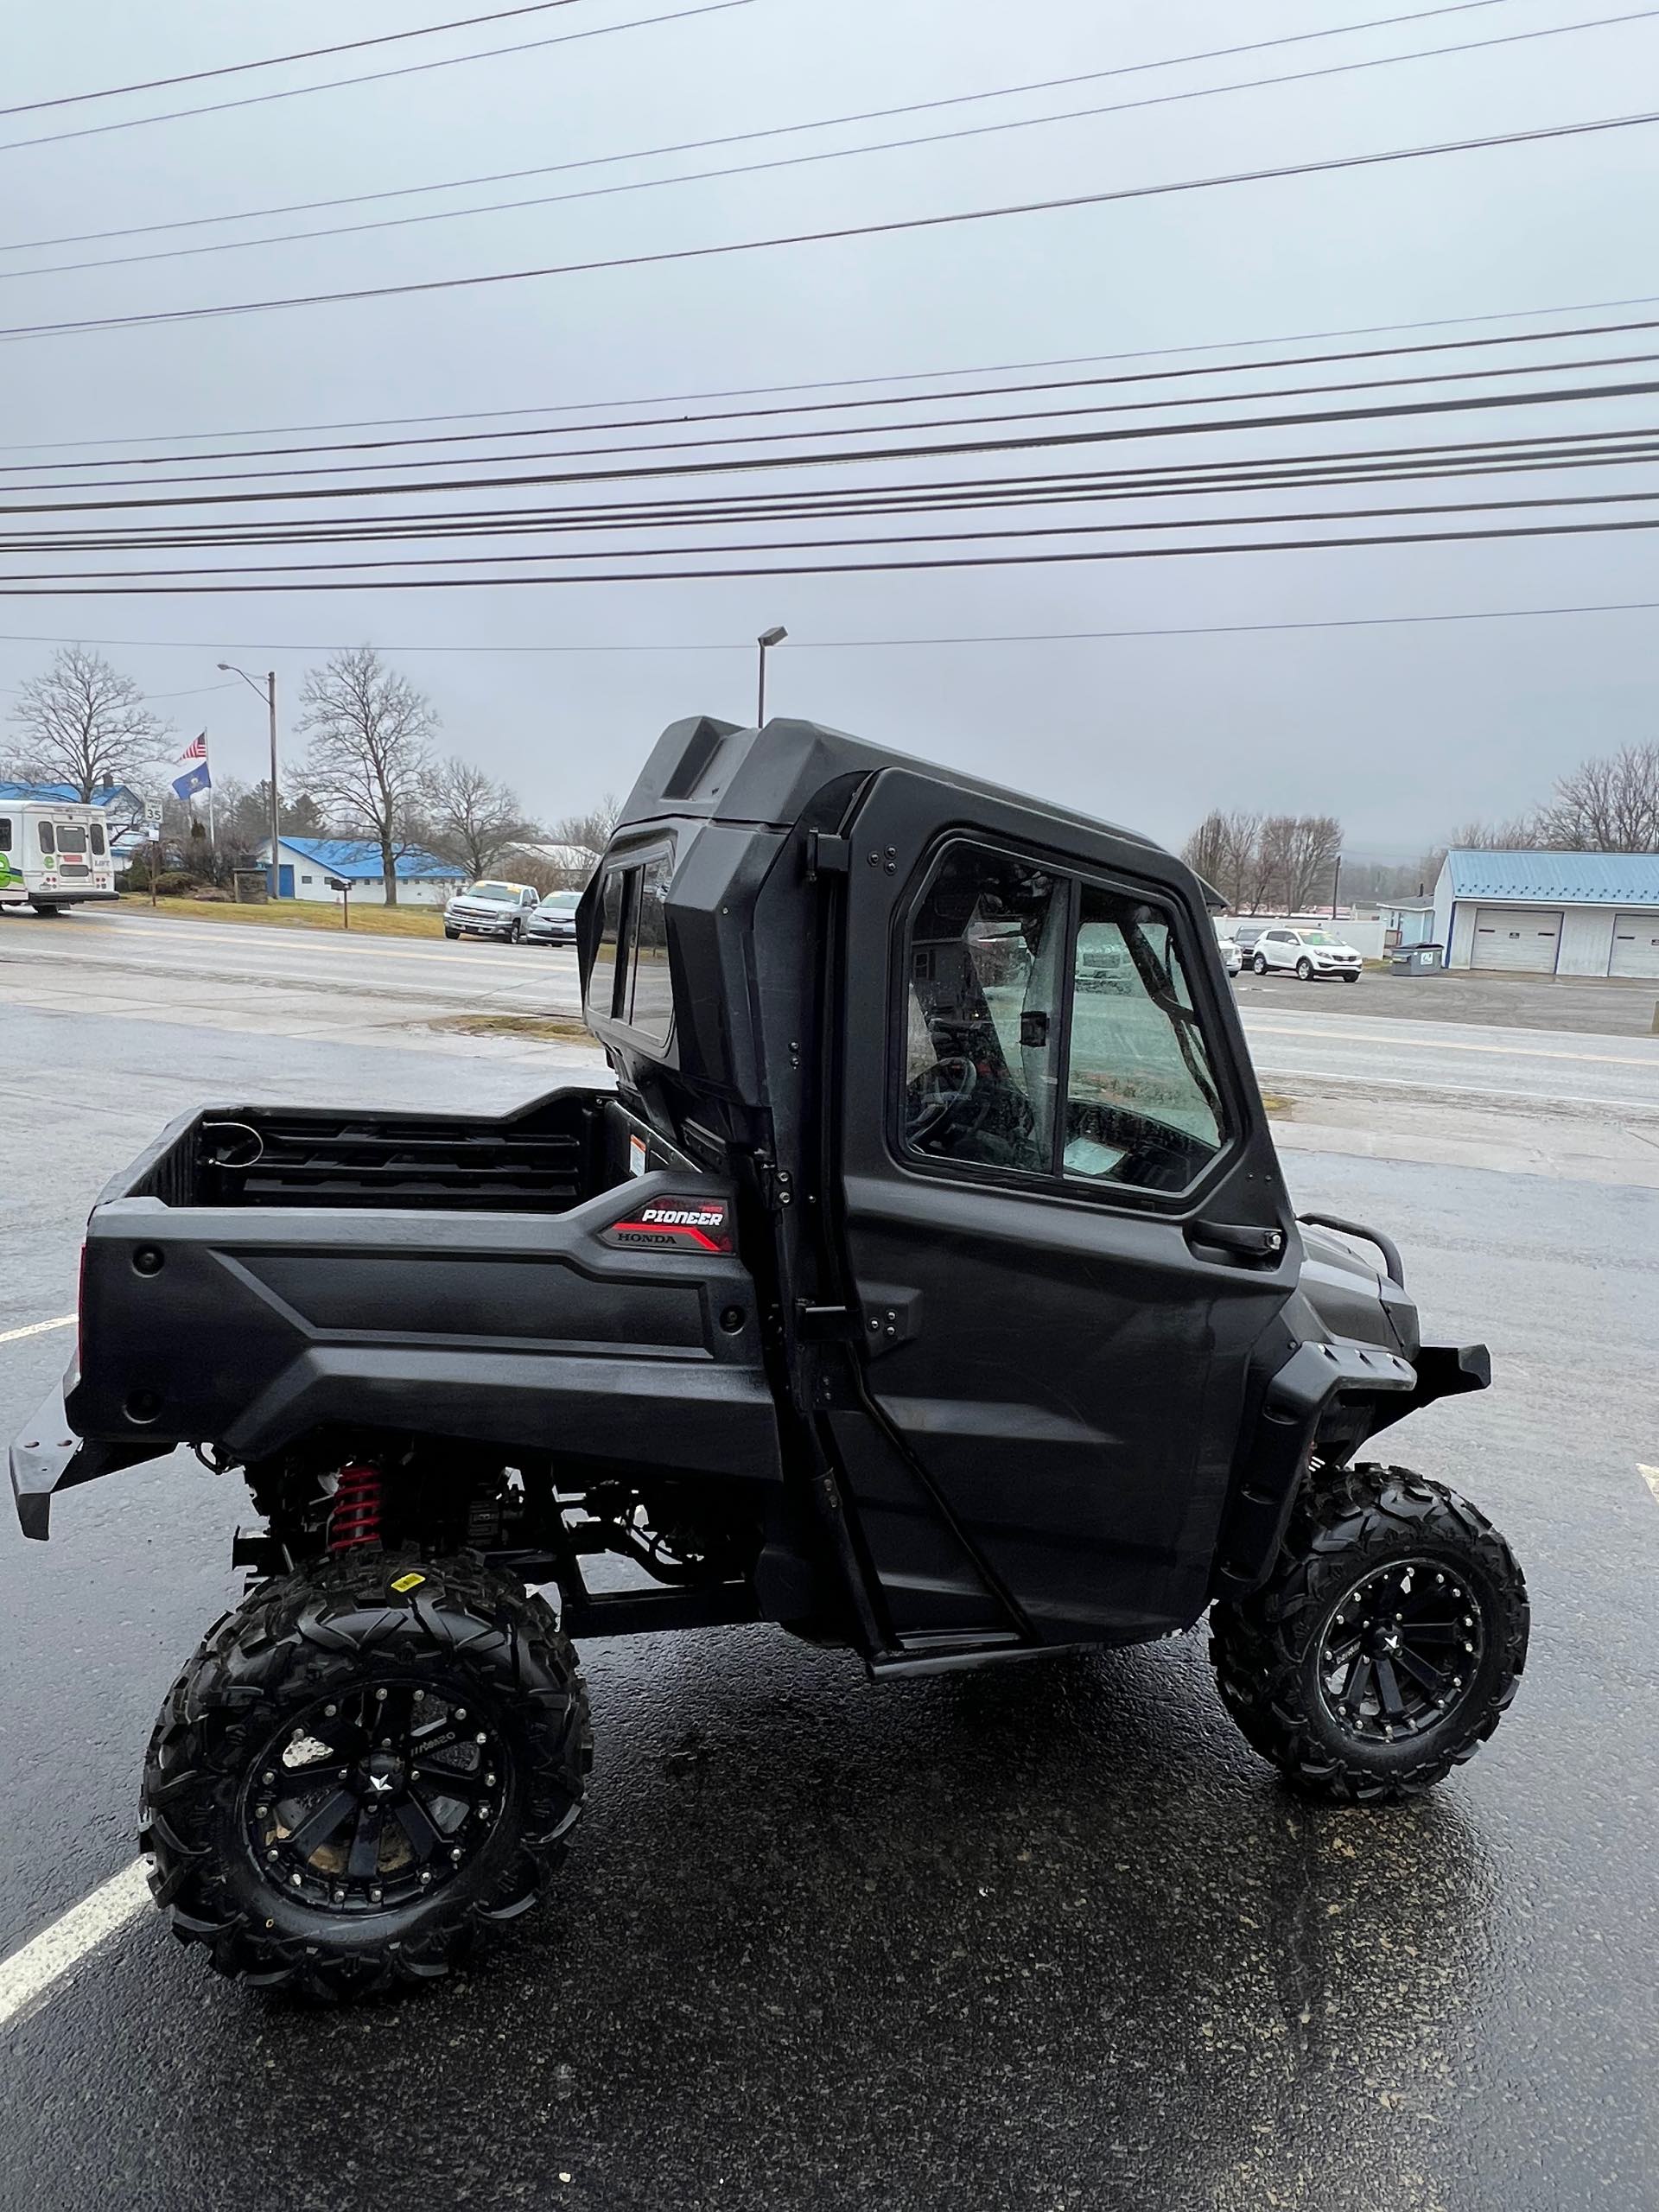 2018 Honda Pioneer 700 Deluxe at Leisure Time Powersports of Corry